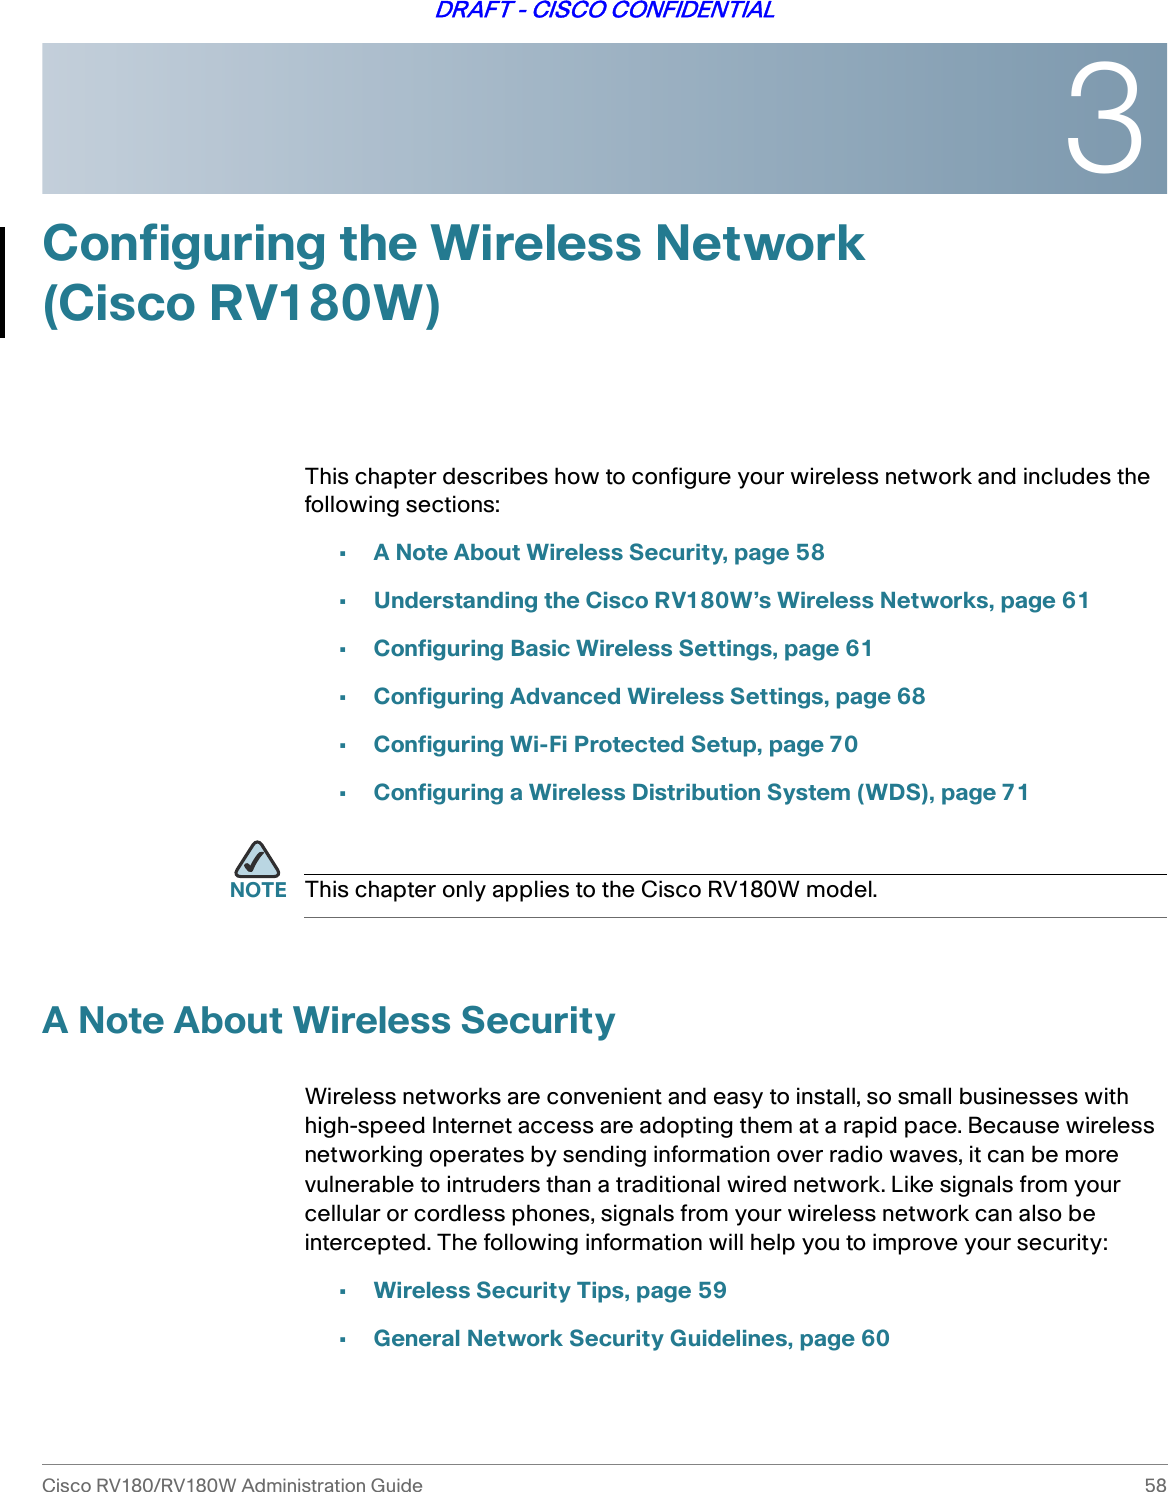 3Cisco RV180/RV180W Administration Guide 58DRAFT - CISCO CONFIDENTIALConfiguring the Wireless Network (Cisco RV180W)This chapter describes how to configure your wireless network and includes the following sections:•A Note About Wireless Security, page 58•Understanding the Cisco RV180W’s Wireless Networks, page 61•Configuring Basic Wireless Settings, page 61•Configuring Advanced Wireless Settings, page 68•Configuring Wi-Fi Protected Setup, page 70•Configuring a Wireless Distribution System (WDS), page 71NOTE This chapter only applies to the Cisco RV180W model. A Note About Wireless SecurityWireless networks are convenient and easy to install, so small businesses with high-speed Internet access are adopting them at a rapid pace. Because wireless networking operates by sending information over radio waves, it can be more vulnerable to intruders than a traditional wired network. Like signals from your cellular or cordless phones, signals from your wireless network can also be intercepted. The following information will help you to improve your security:•Wireless Security Tips, page 59•General Network Security Guidelines, page 60